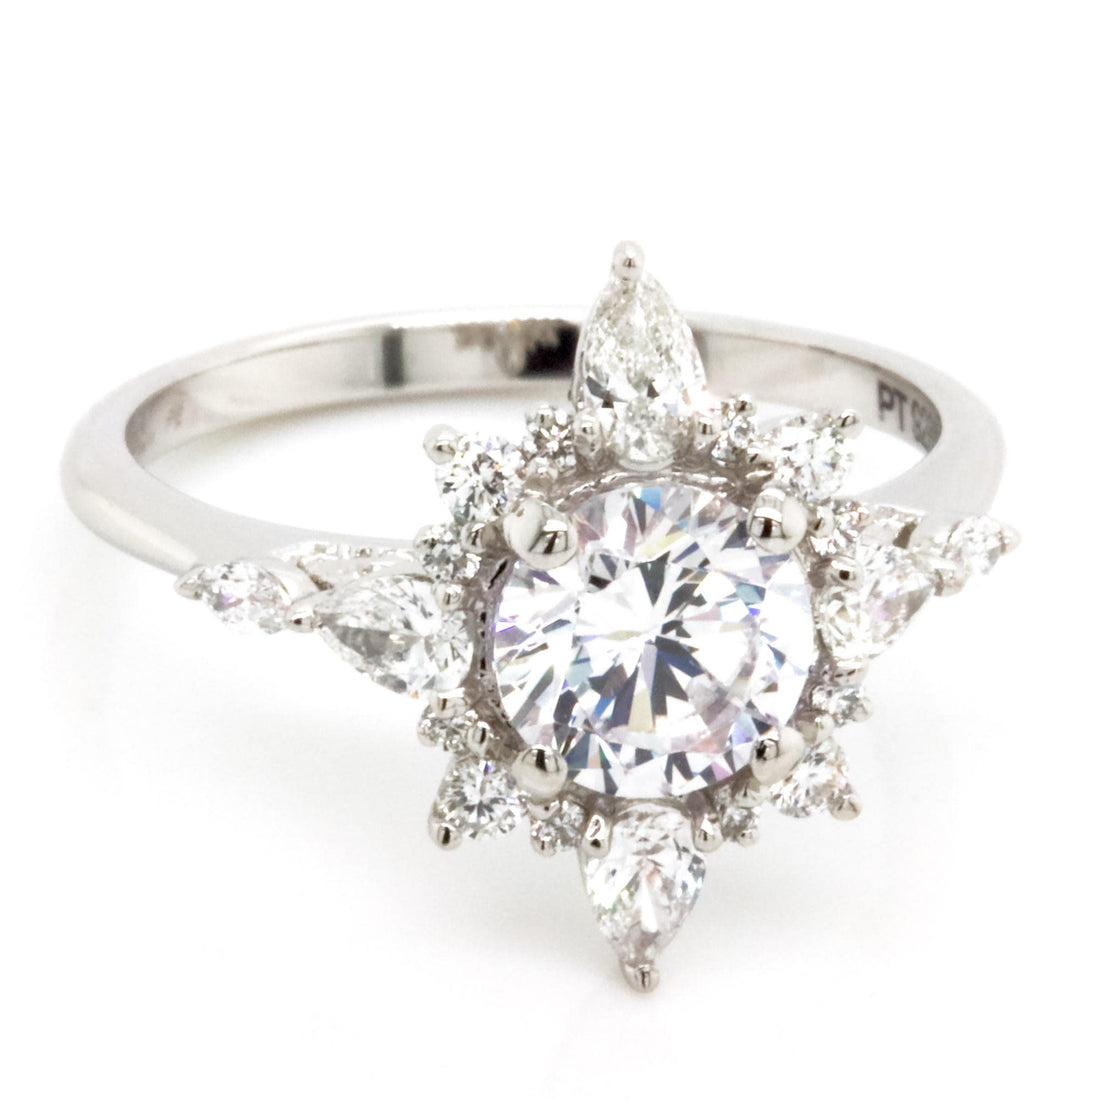 Floral Inspired Diamond Engagement Ring